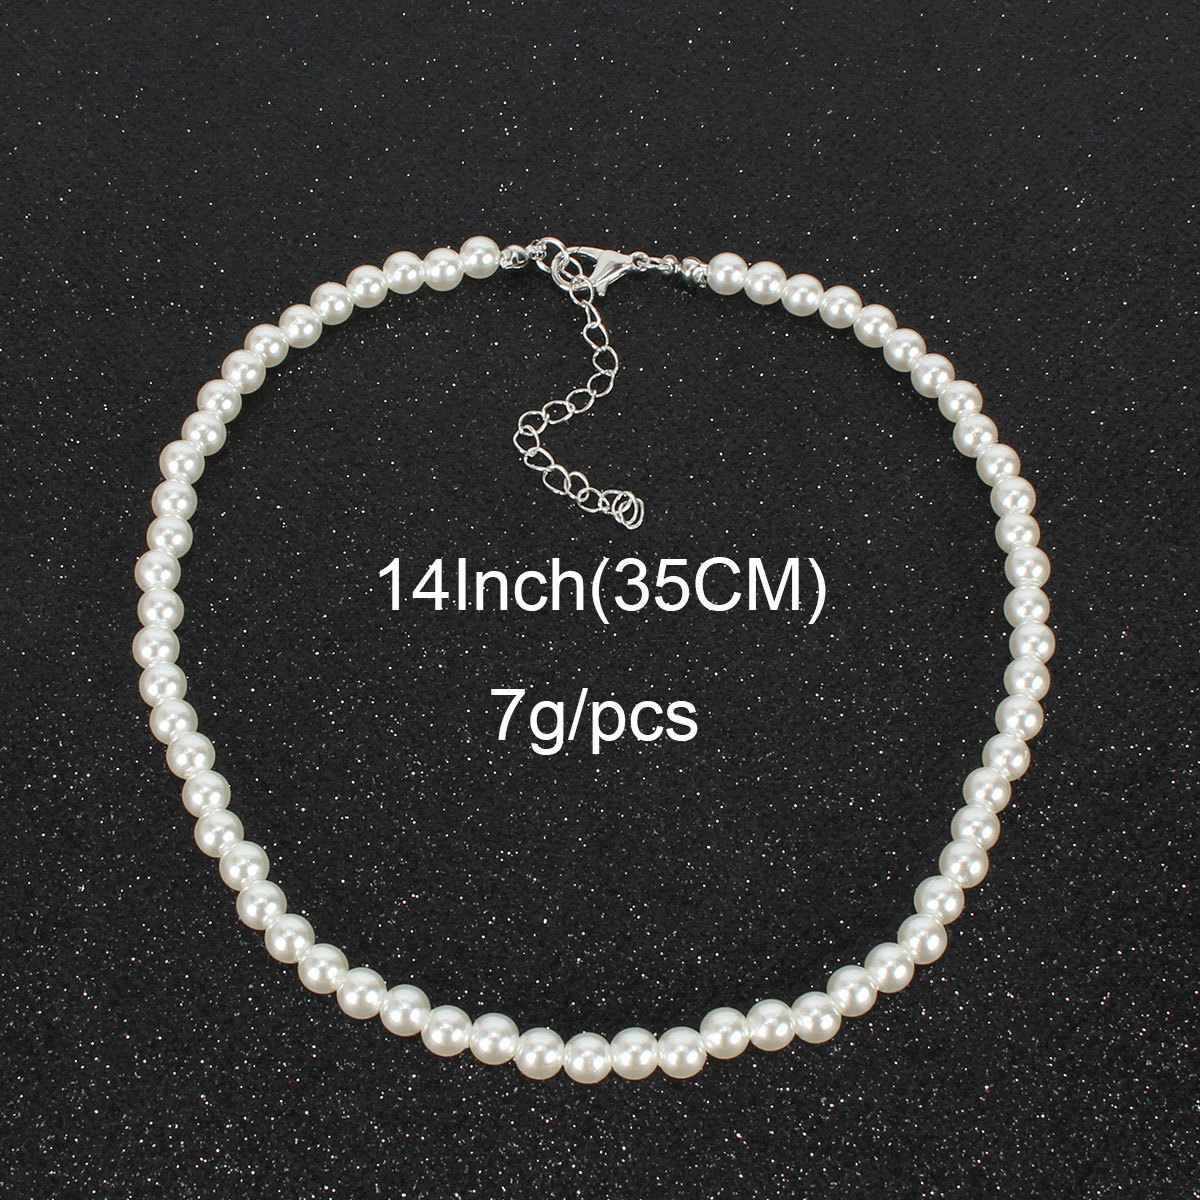 Fashionable And Versatile Near Round Imitation Pearl Necklace Neck Chain Female Clavicle Chain-1